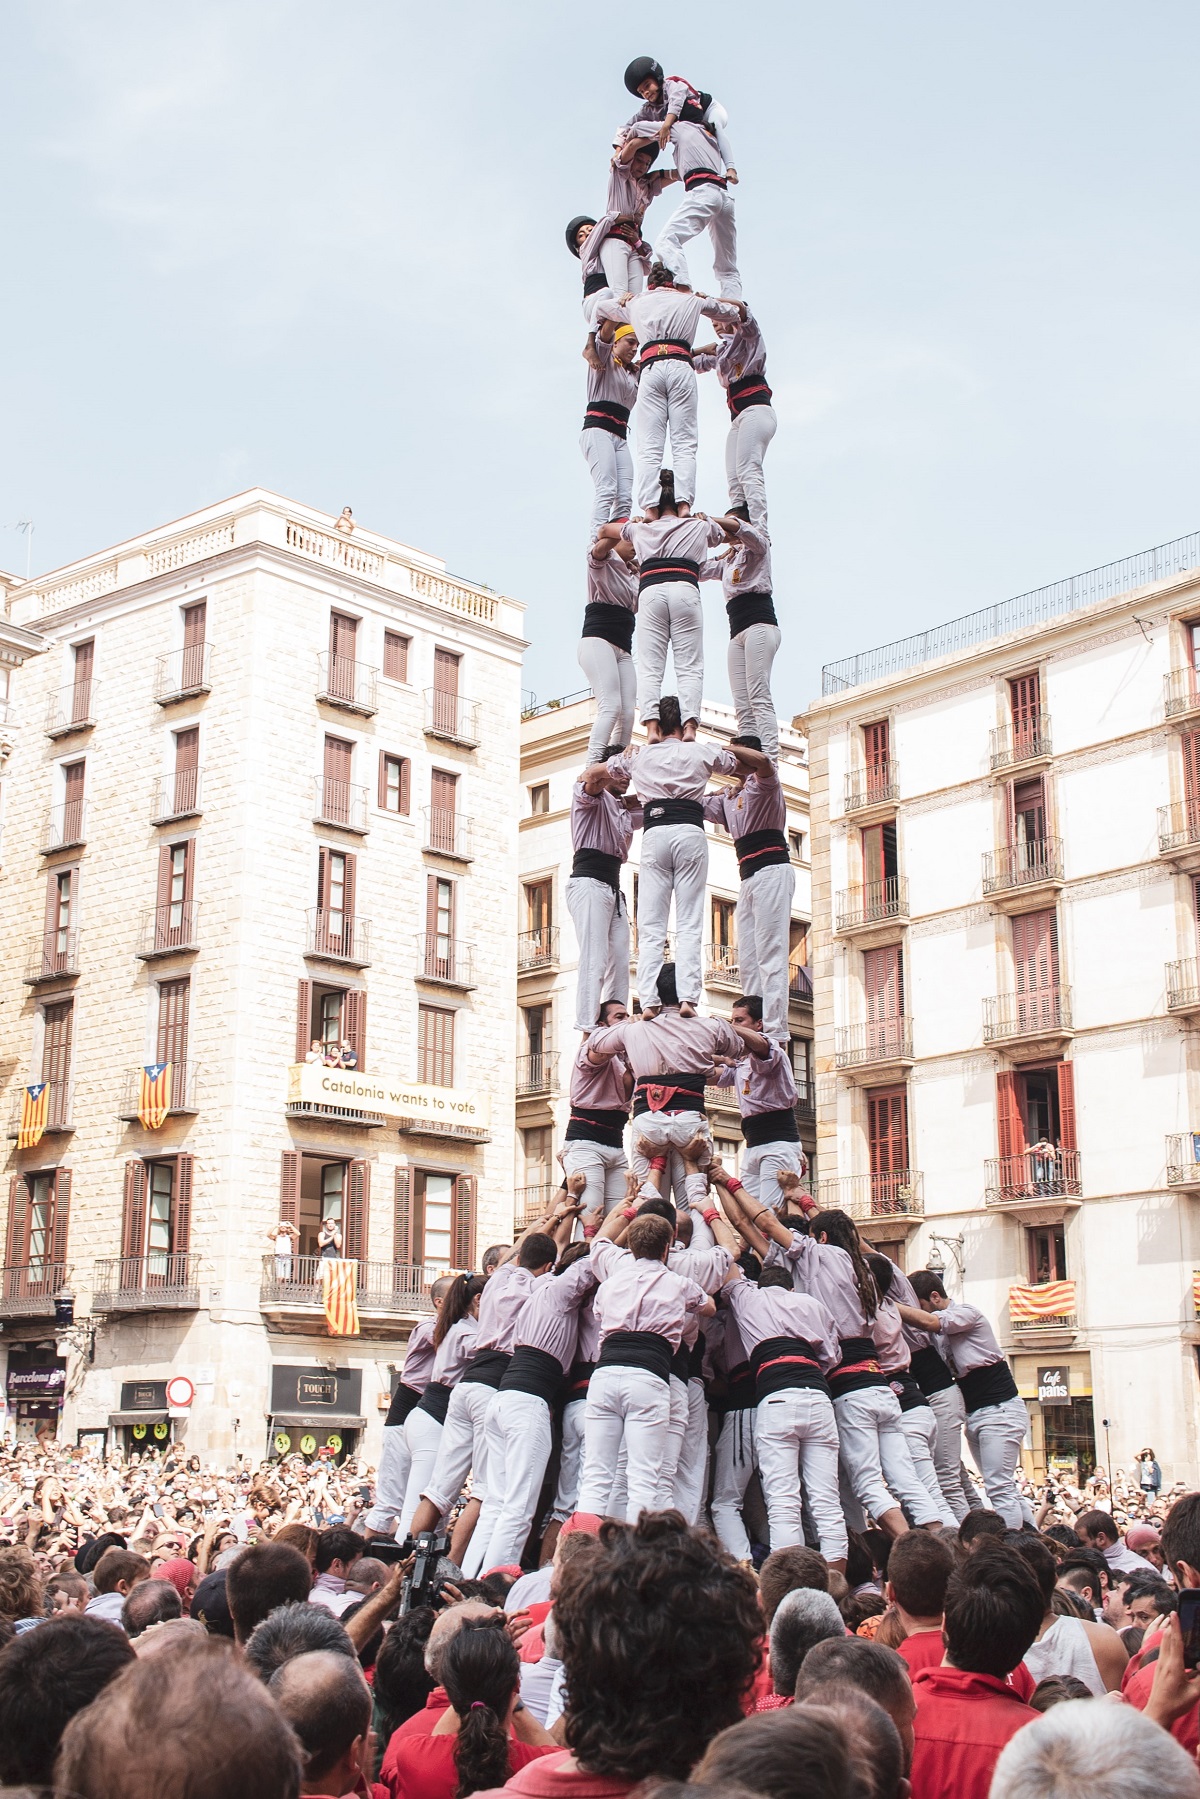 Human pyramid with castellers wearing white outfits and black belts with city in background